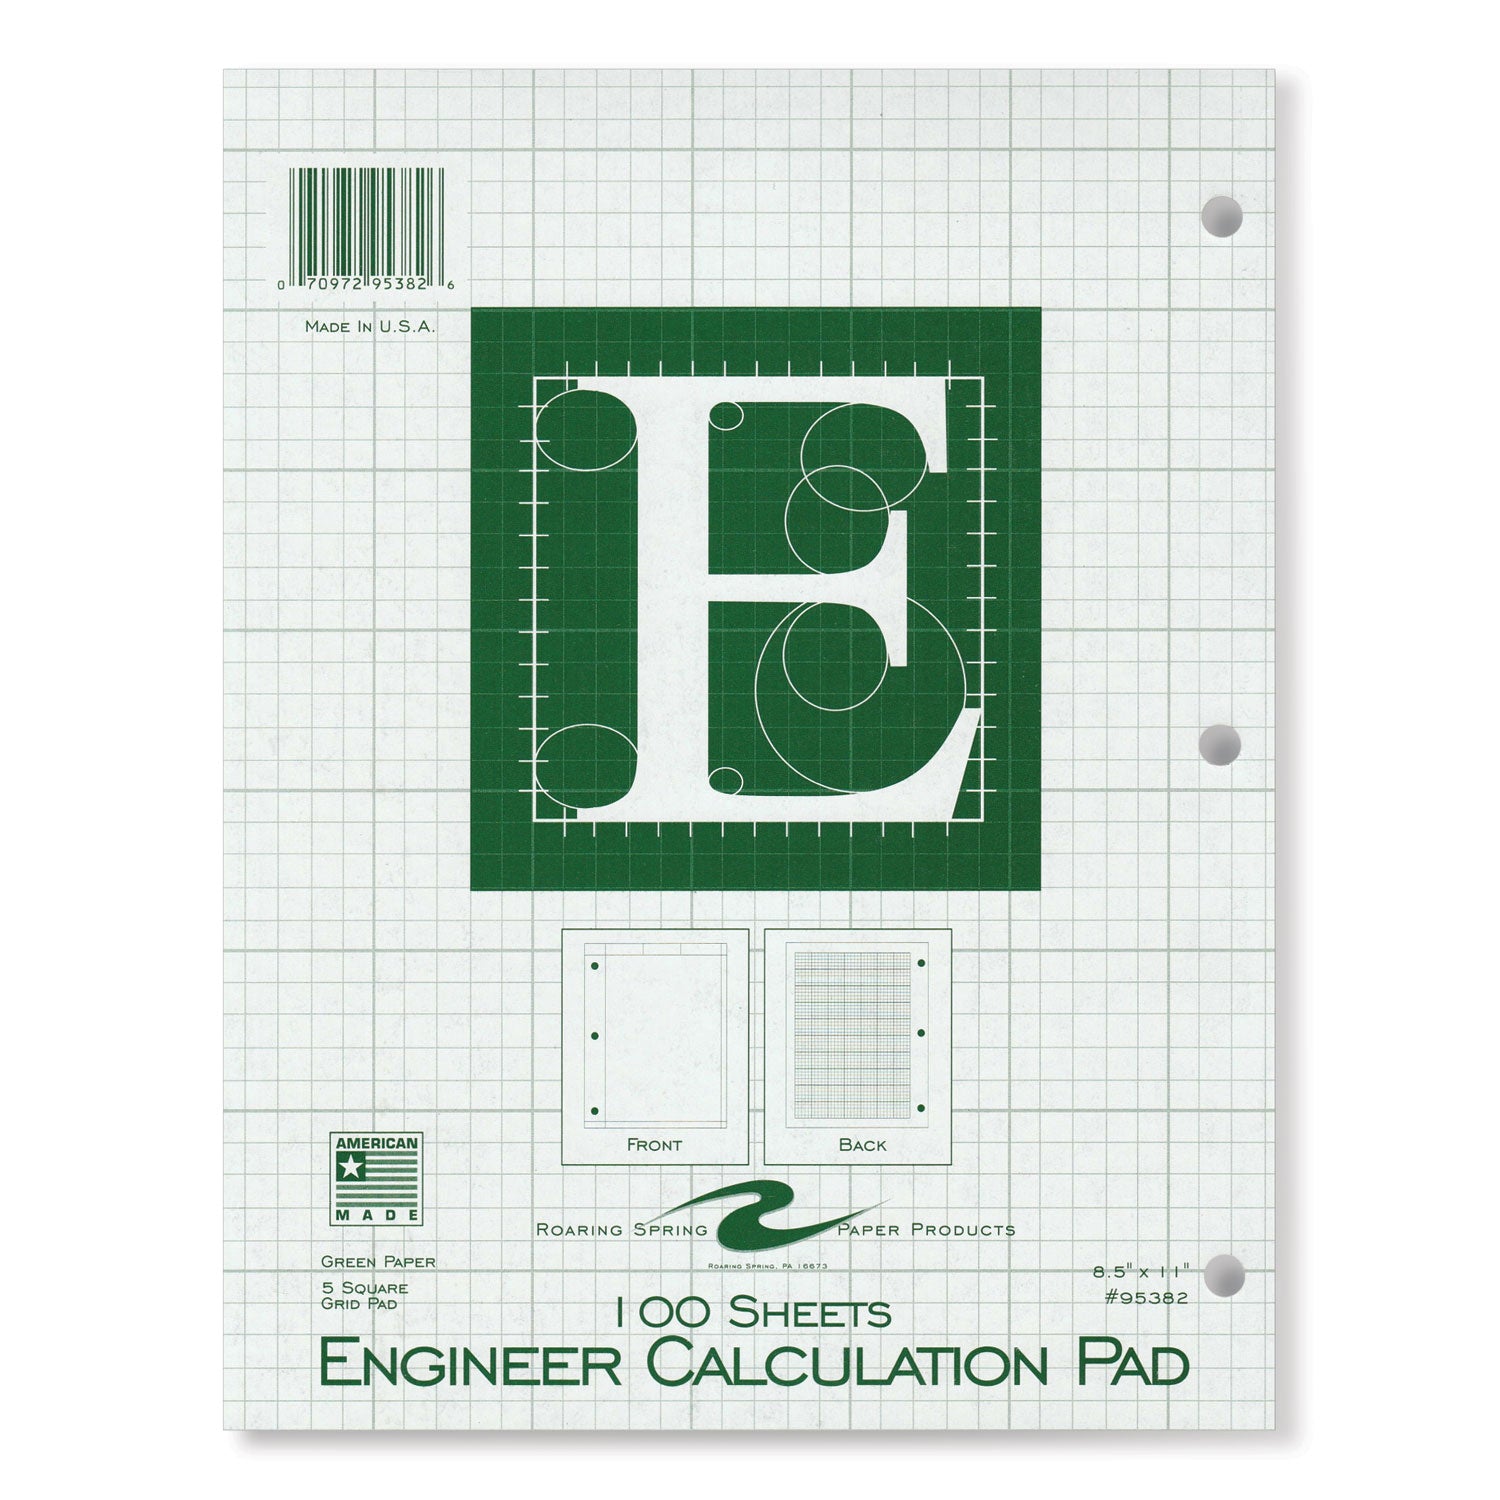 engineer-pad-05-margins-quad-rule-5-sq-in-1-sq-in-100-lt-green-85x11-sheets-pad-24-ct-ships-in-4-6-business-days_roa95382cs - 3